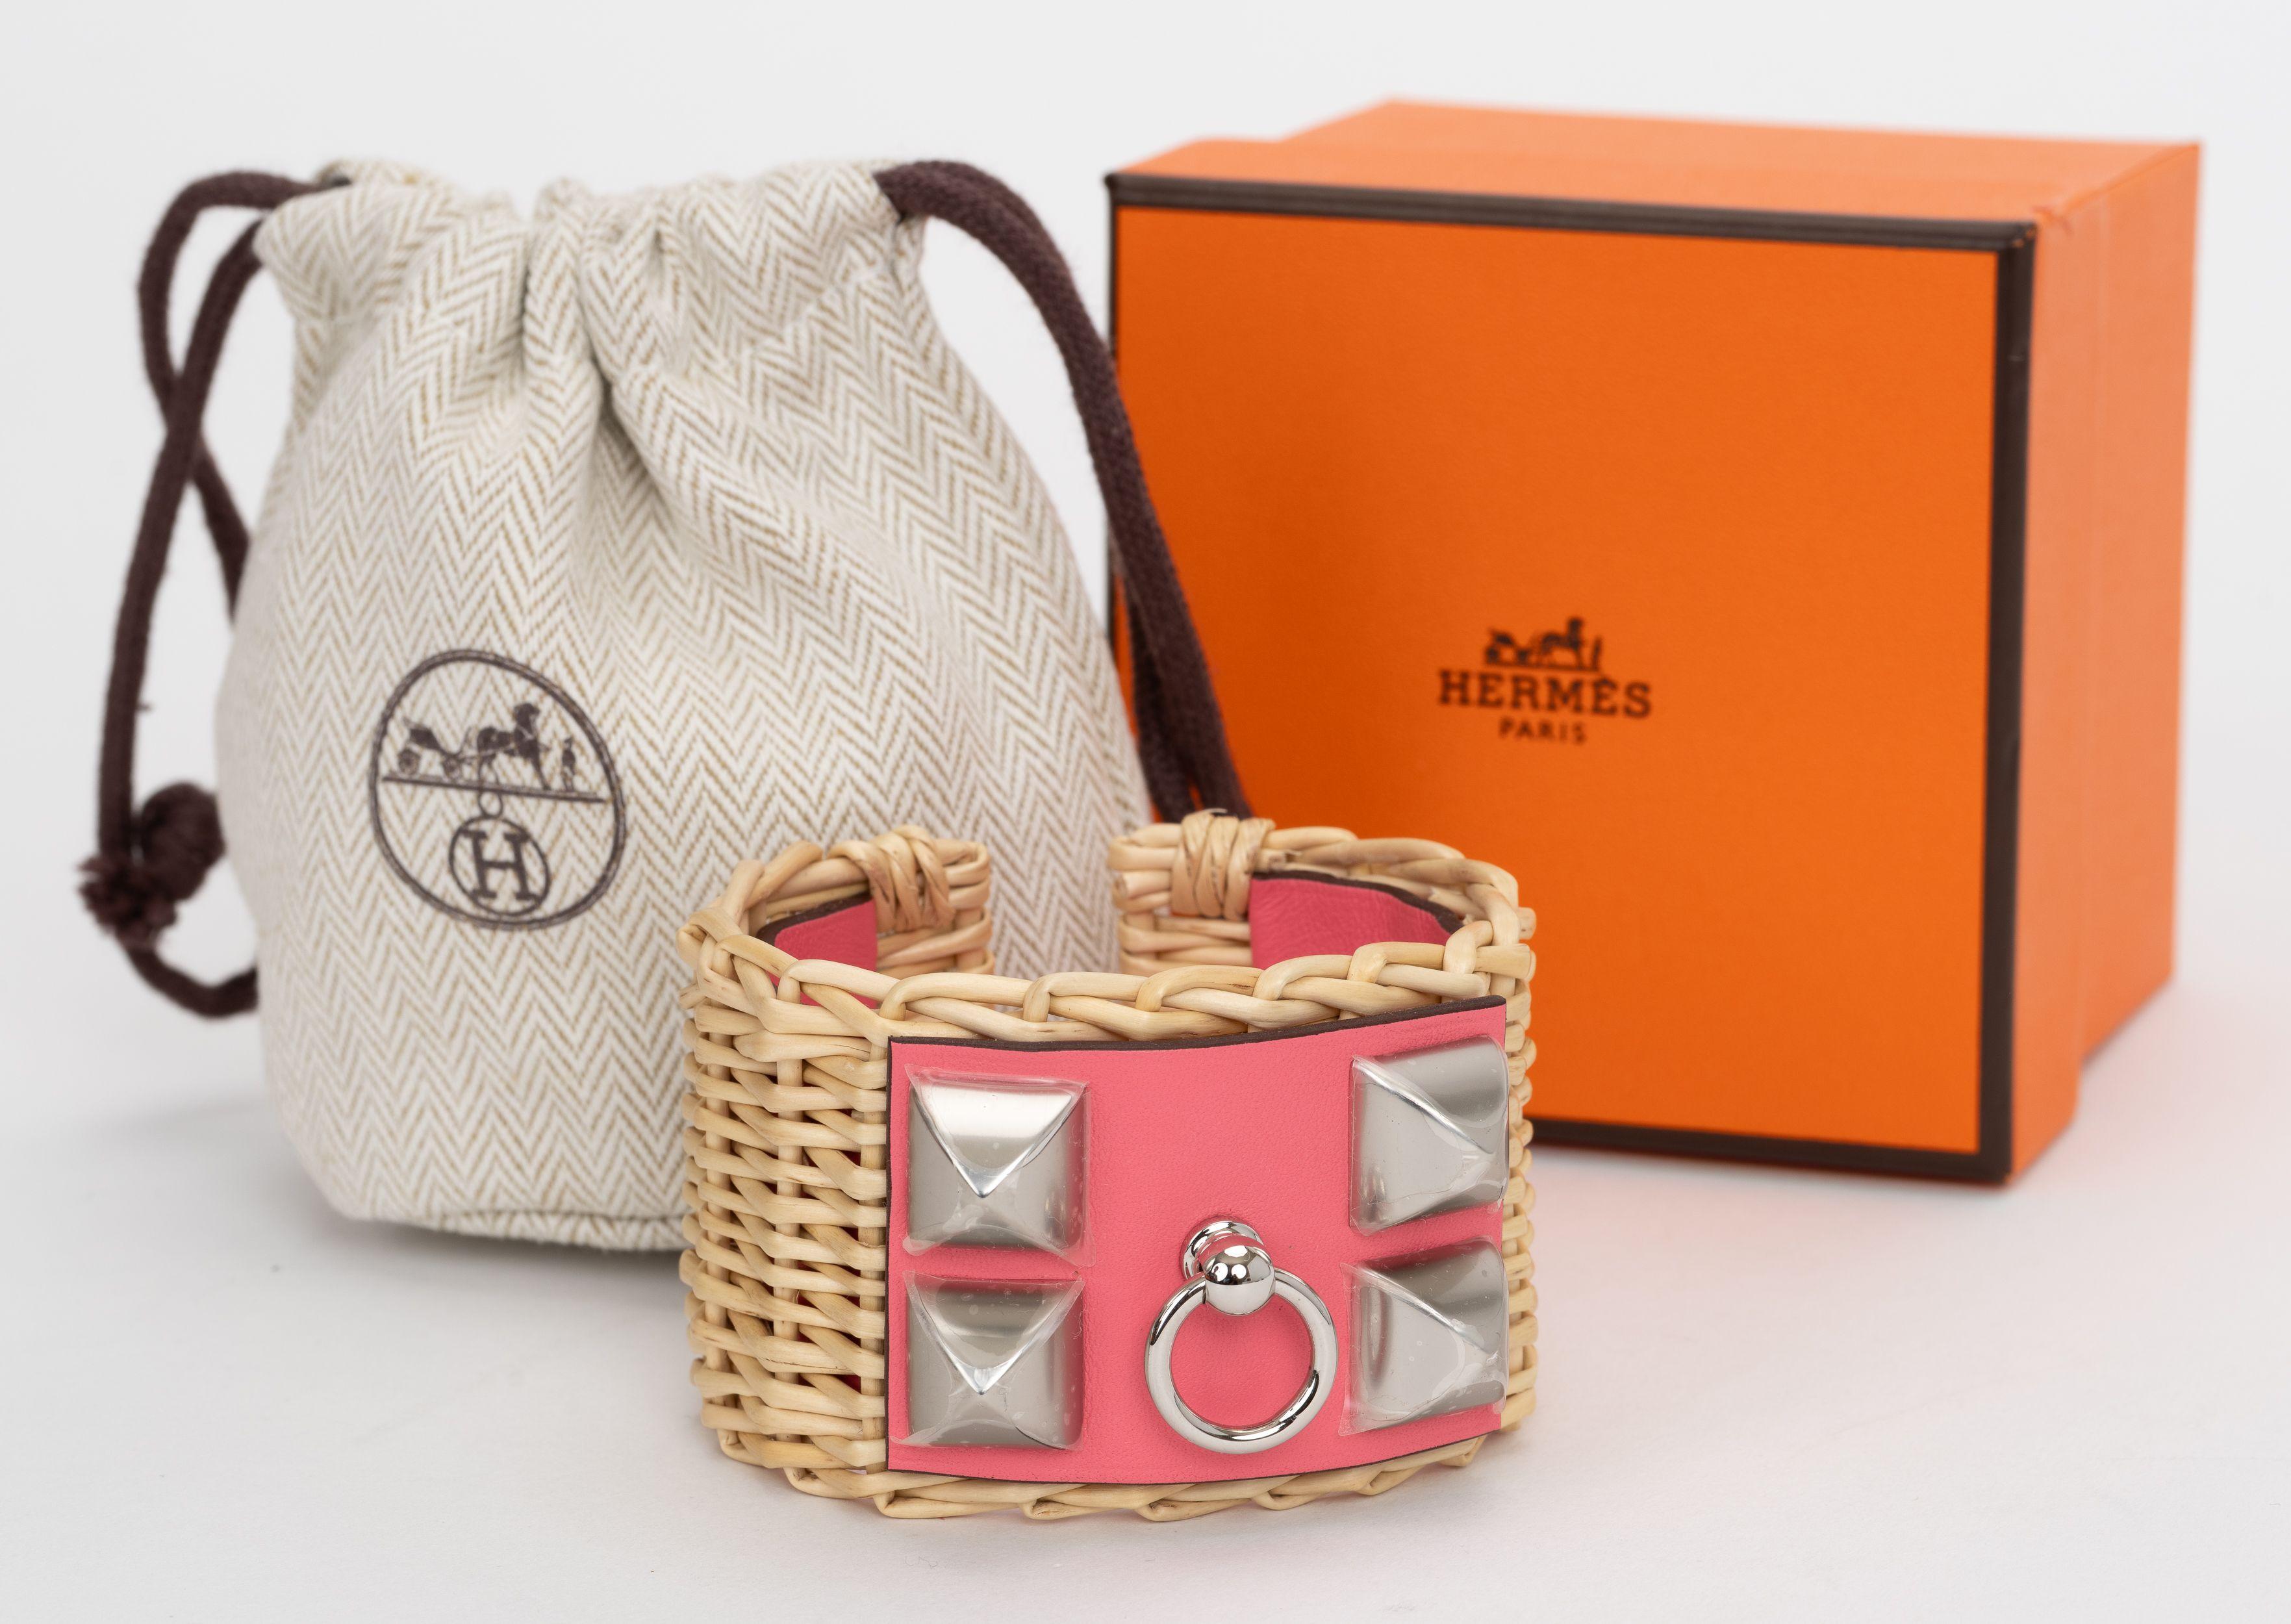 The Hermes Picnic Cuff features palladium plated hardware. The wicker wood and swift calfskin leather detail make it a great accessory for summertime! Rose azalee leather. 
Size T3. Date stamp B.
Comes with original dust cover, box, ribbon.